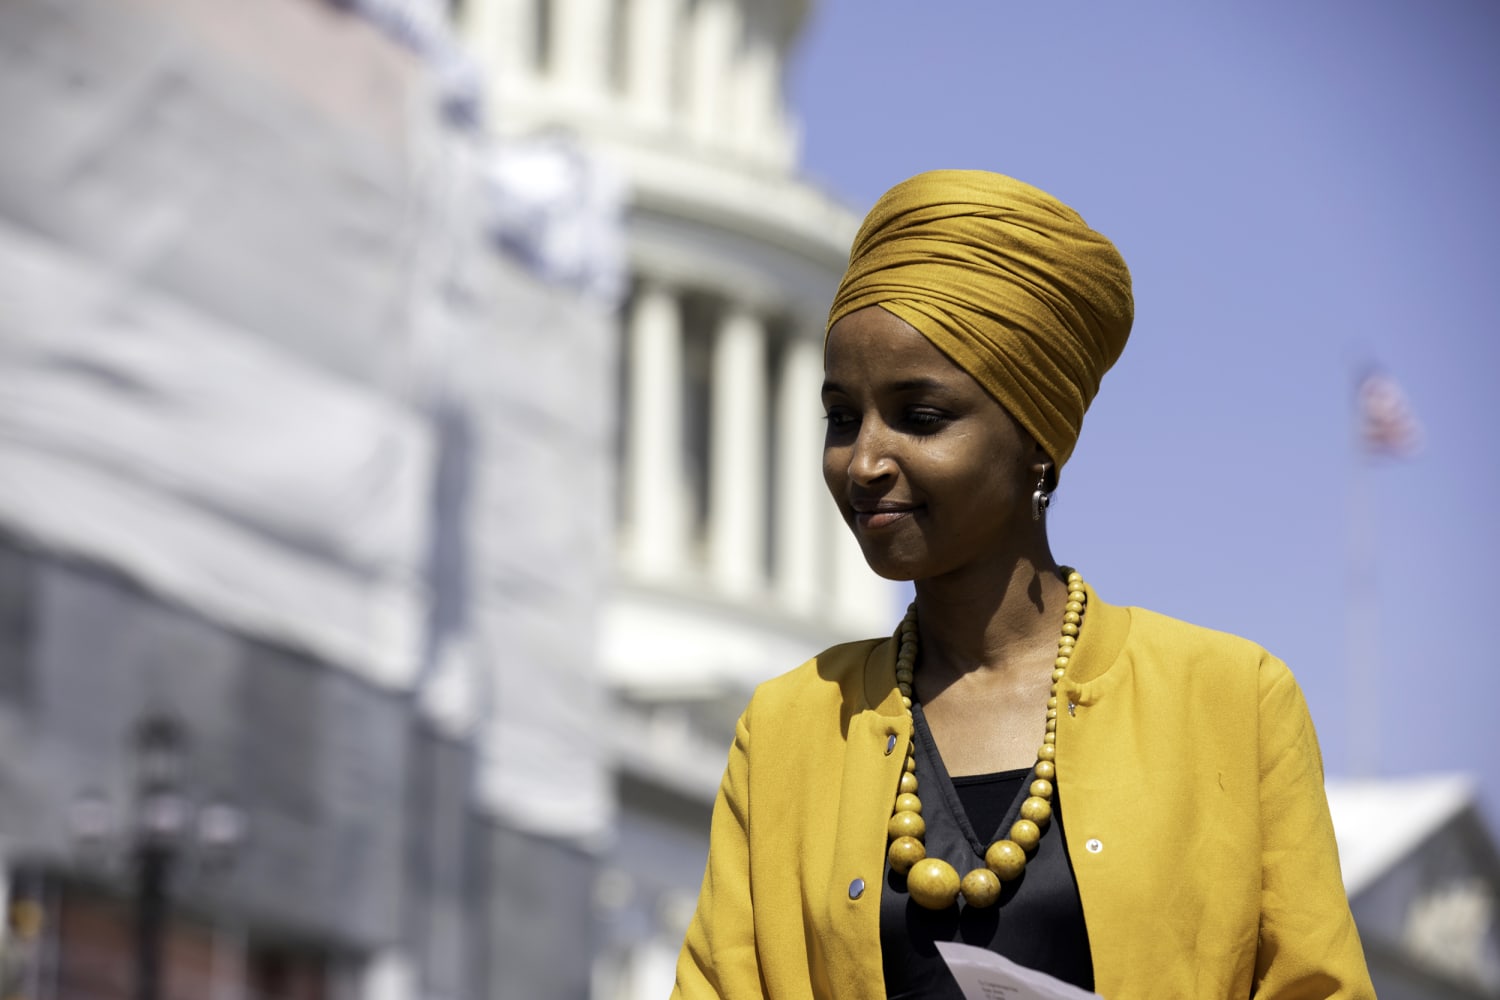 ilhan omar s opponent banned from twitter after suggesting congresswoman should be hanged